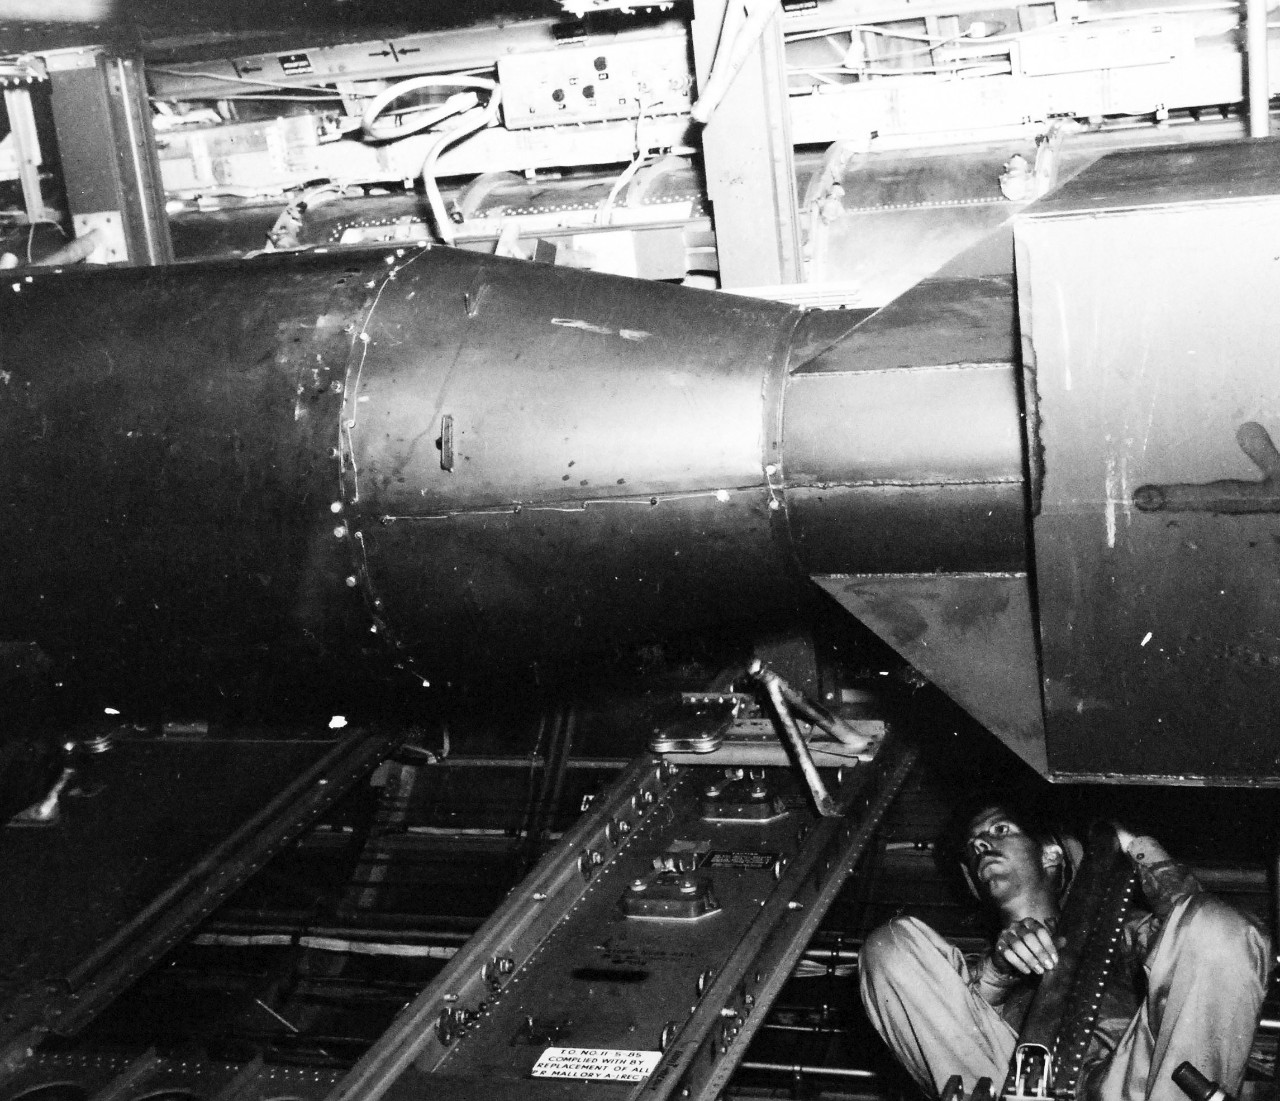 77-BT-132:    Tinian Island, August 1945.   Atomic bomb, Little Boy, in bomb bay of B-29 Superfortress, Enola Gay.  S. Dike is examining fit of unit.   Official photograph of the Office of Chief of Engineers, now in the collection of the National Achives.   (2015/08/25). 